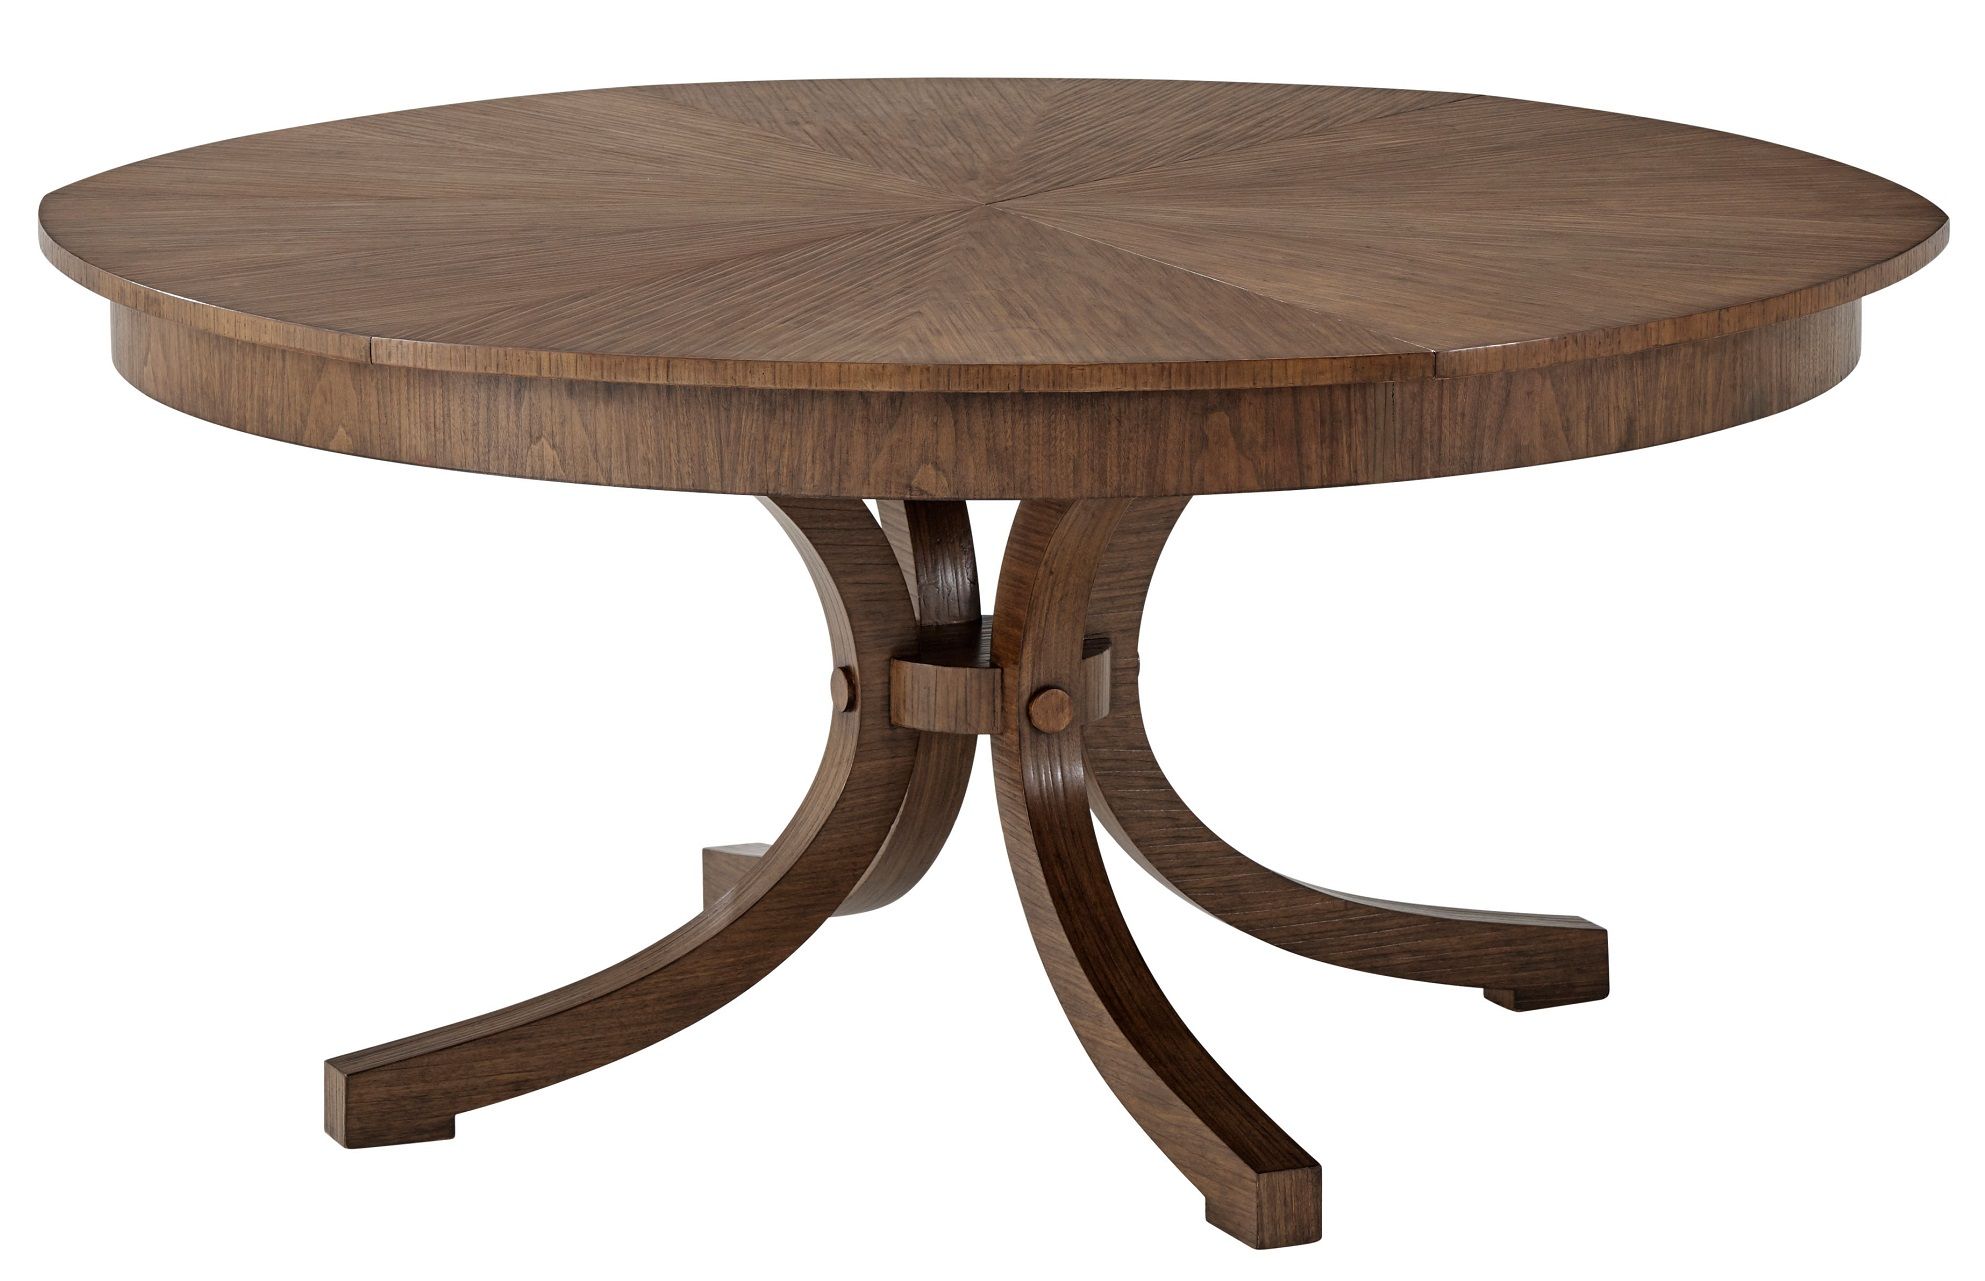 This round dining table has a transitional style, six pull-out sections, and six self-storing fold-out leaves